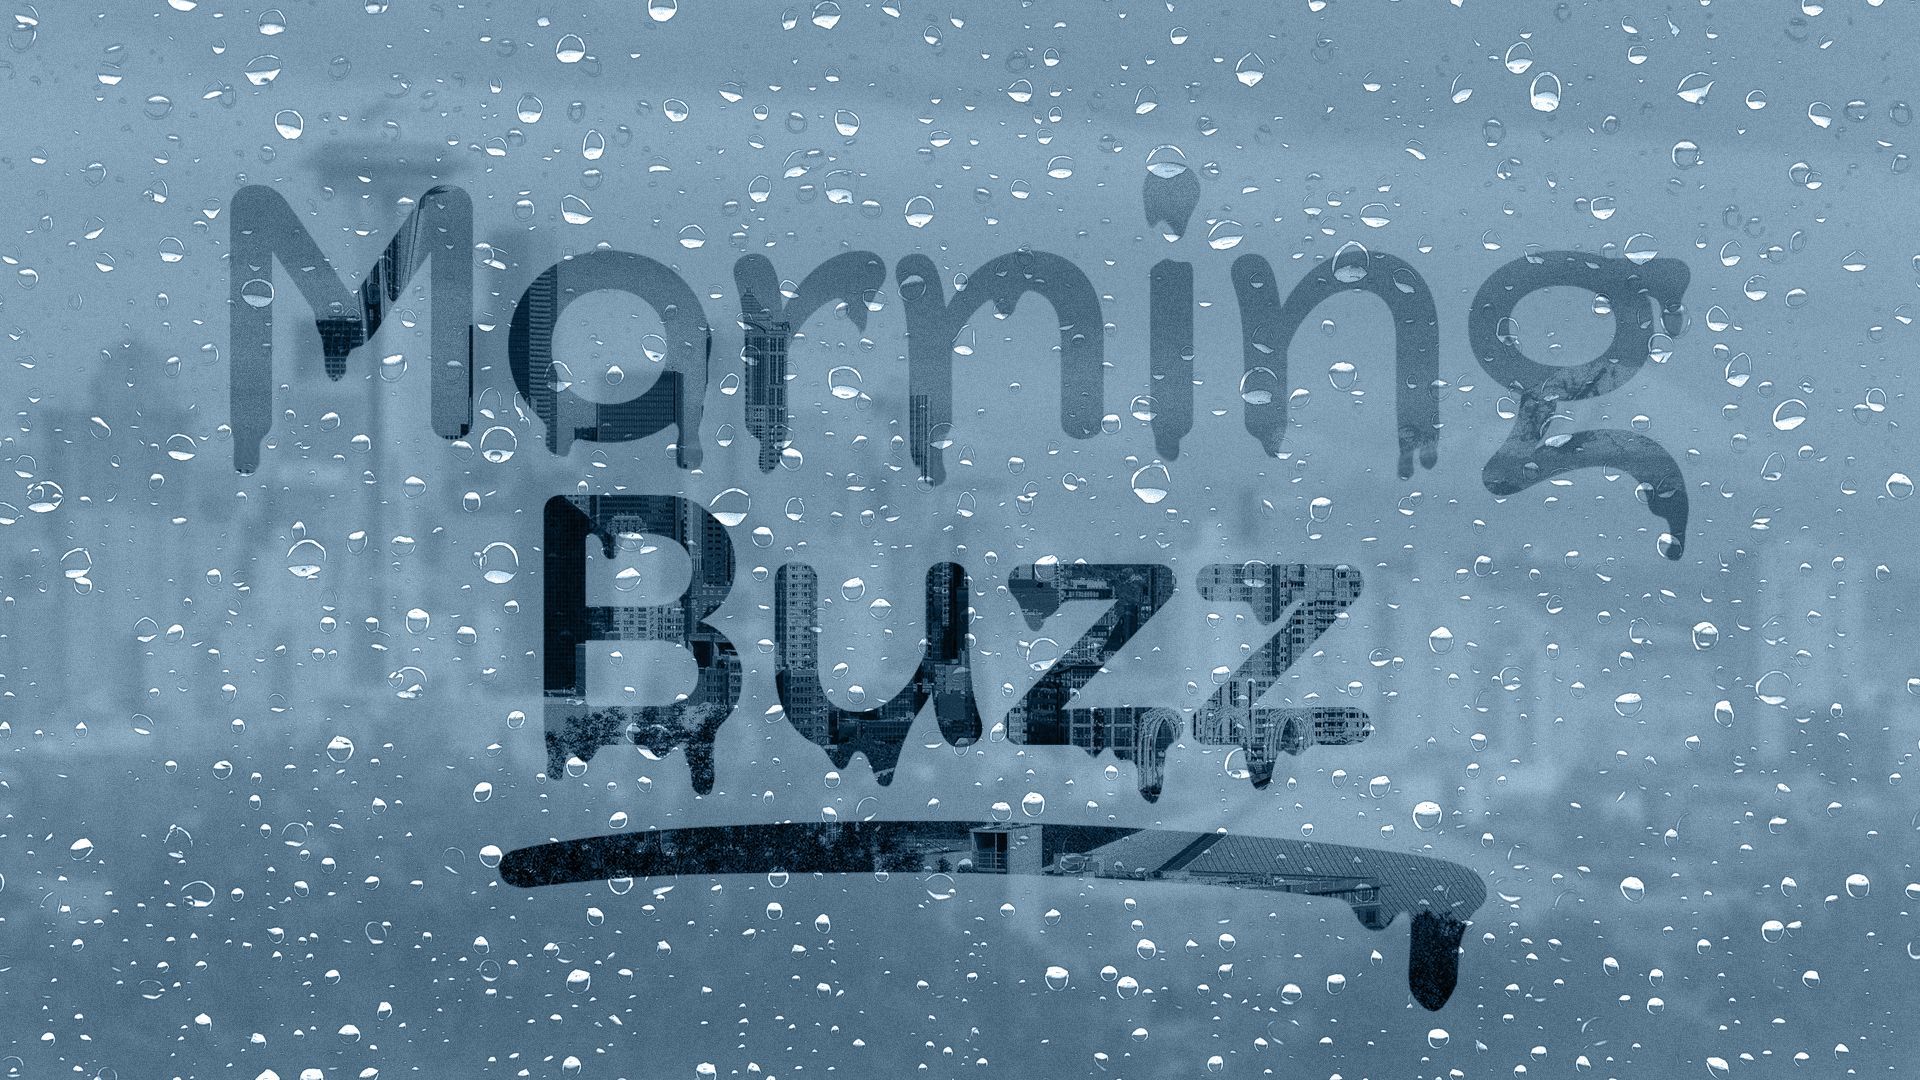 Illustration of "Morning Buzz" written on a foggy window with Seattle skyline in the background.